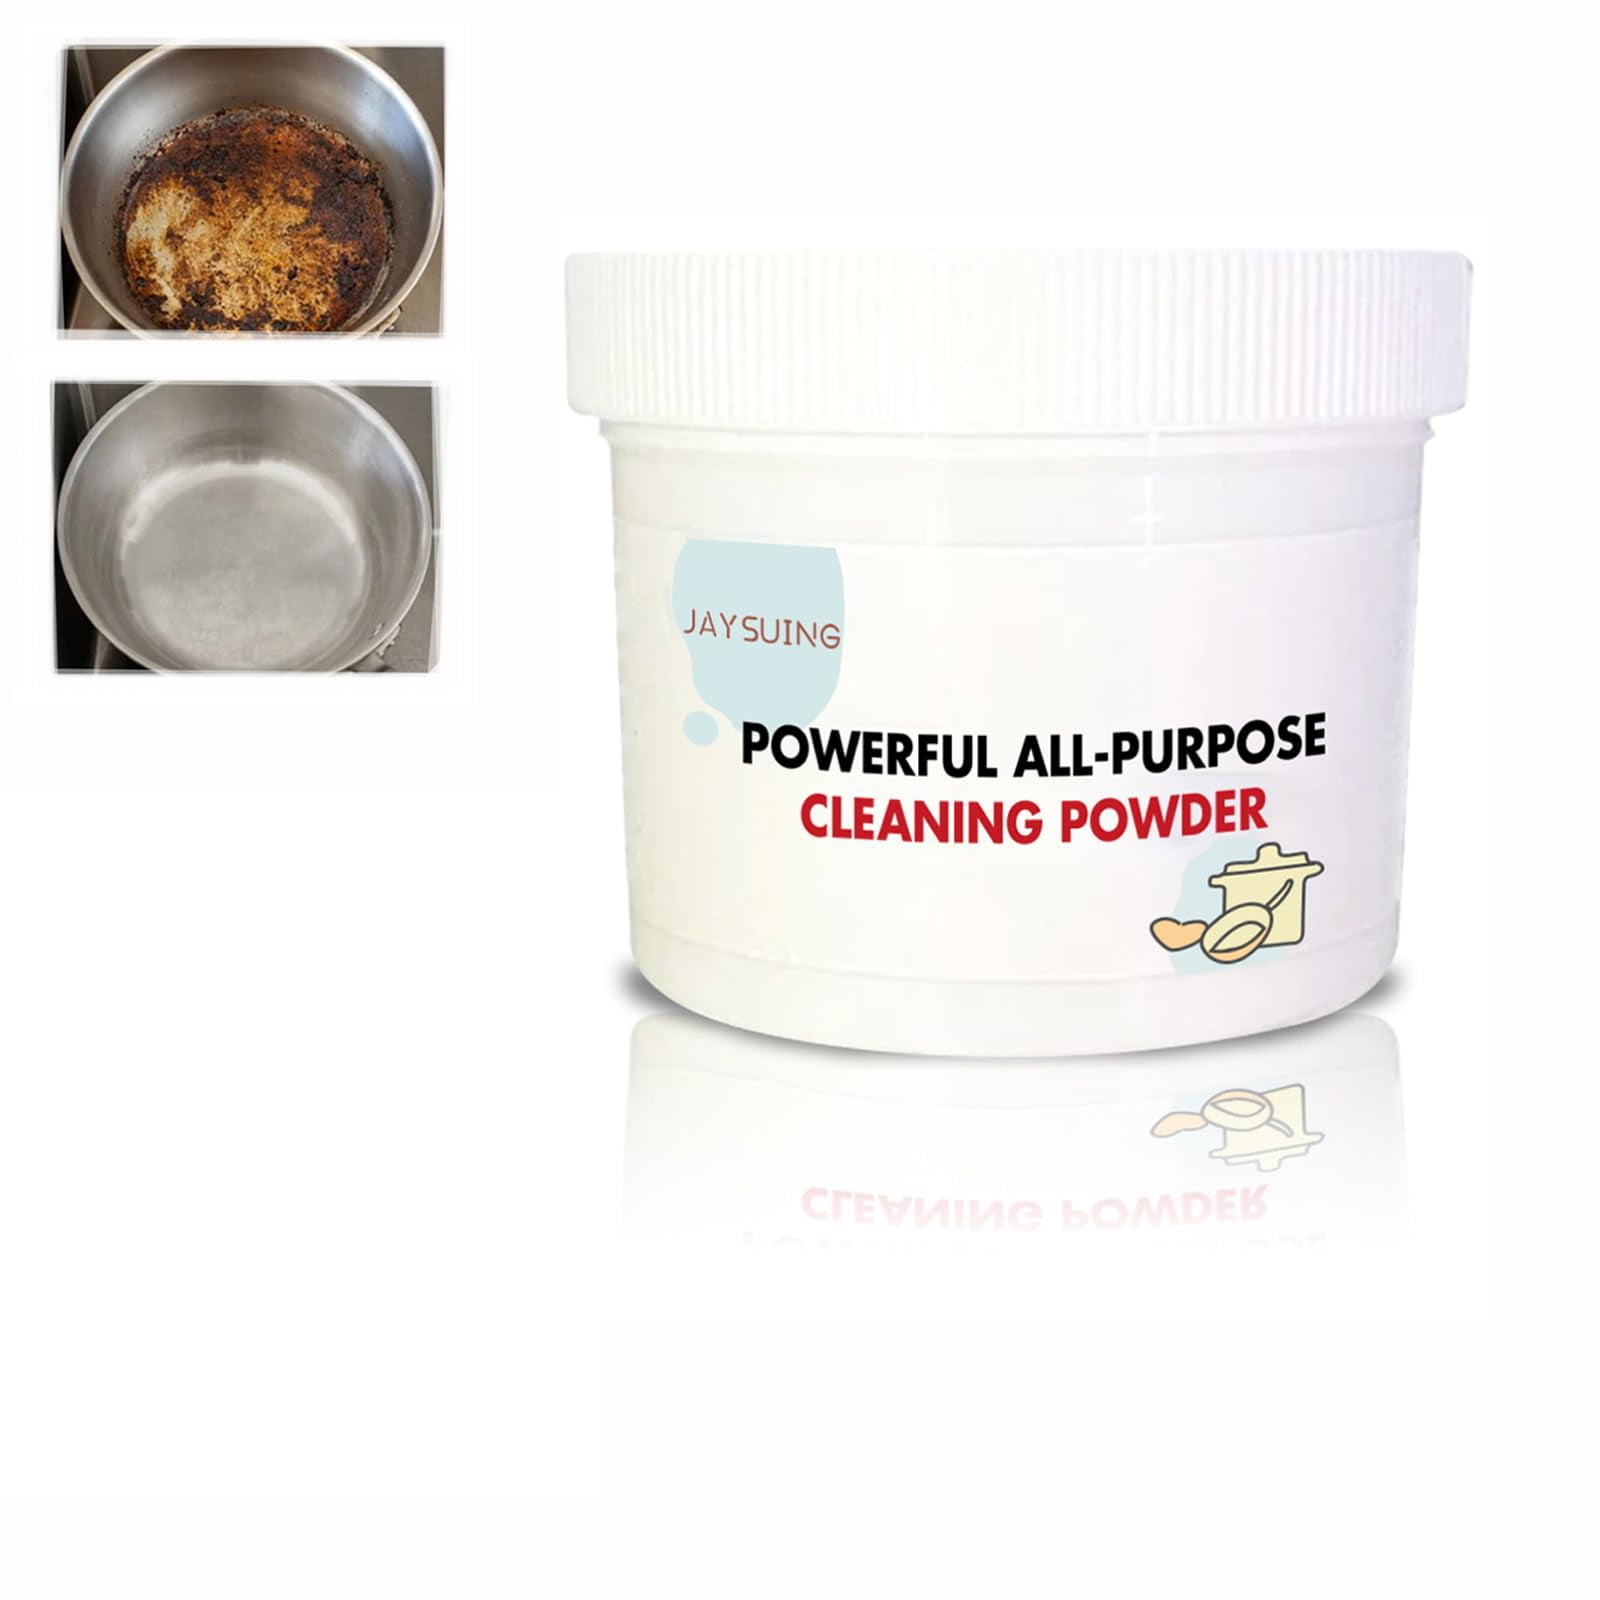 All-purpose Kitchen Pots And Pan Cleaner, Kitchen Cleaner, All Purpose  Kitchen Cleaner, Multi-purpose Foam Cleaner